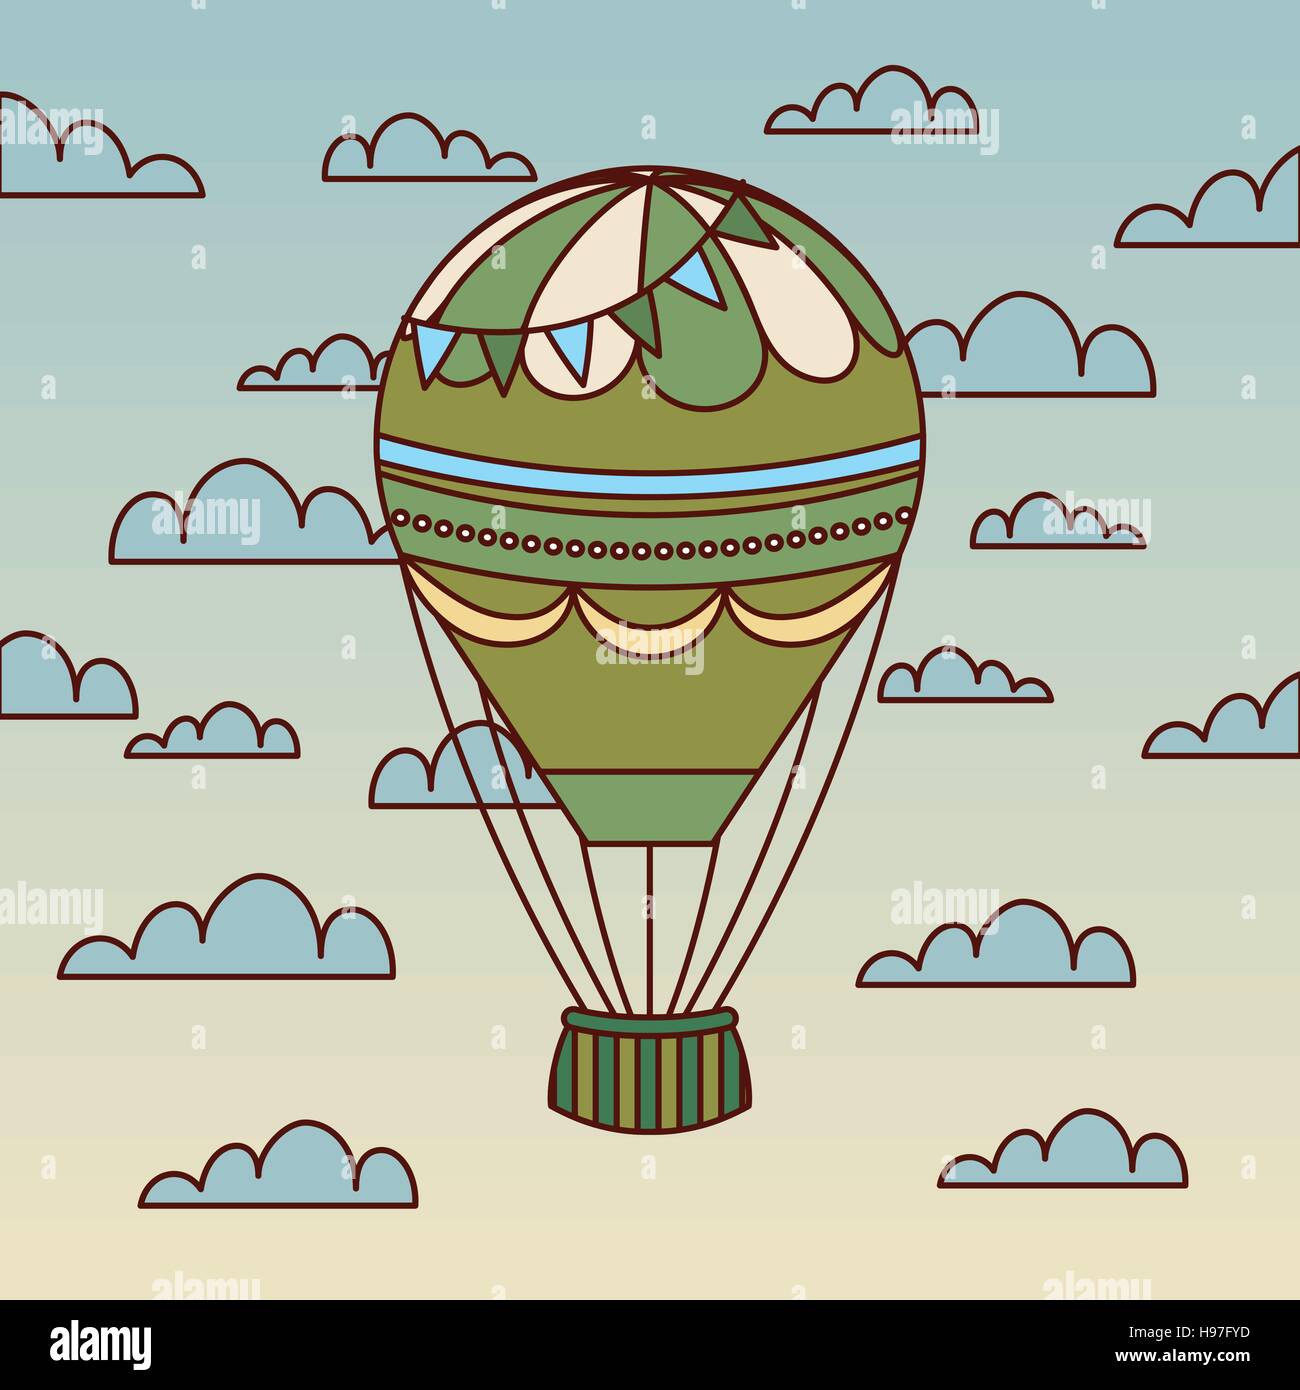 air balloon icon over sky background. colorful design. vector illustration Stock Vector